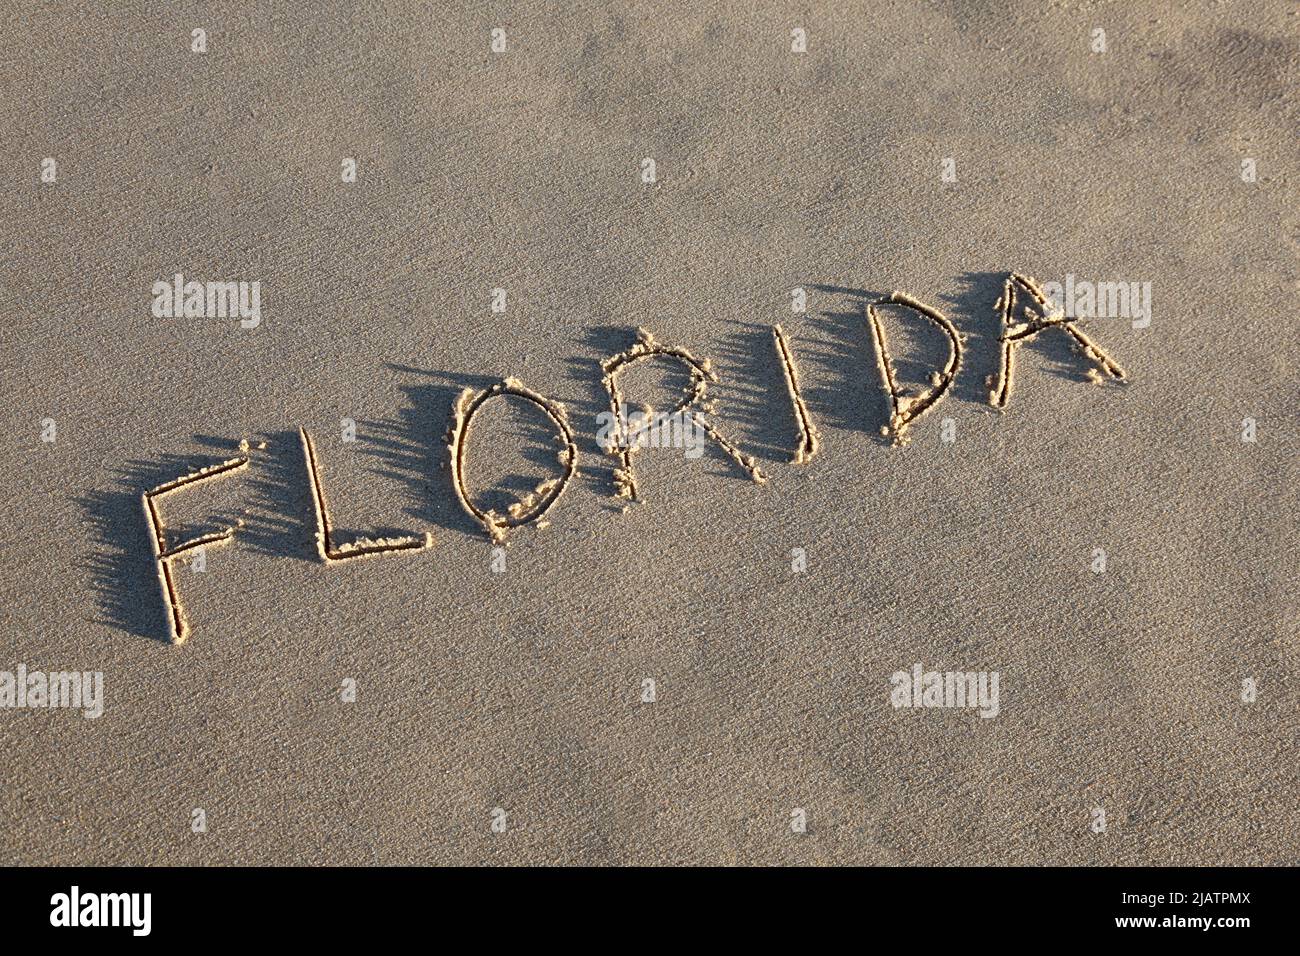 Florida drawn in the sand at the beach on an angle. Stock Photo